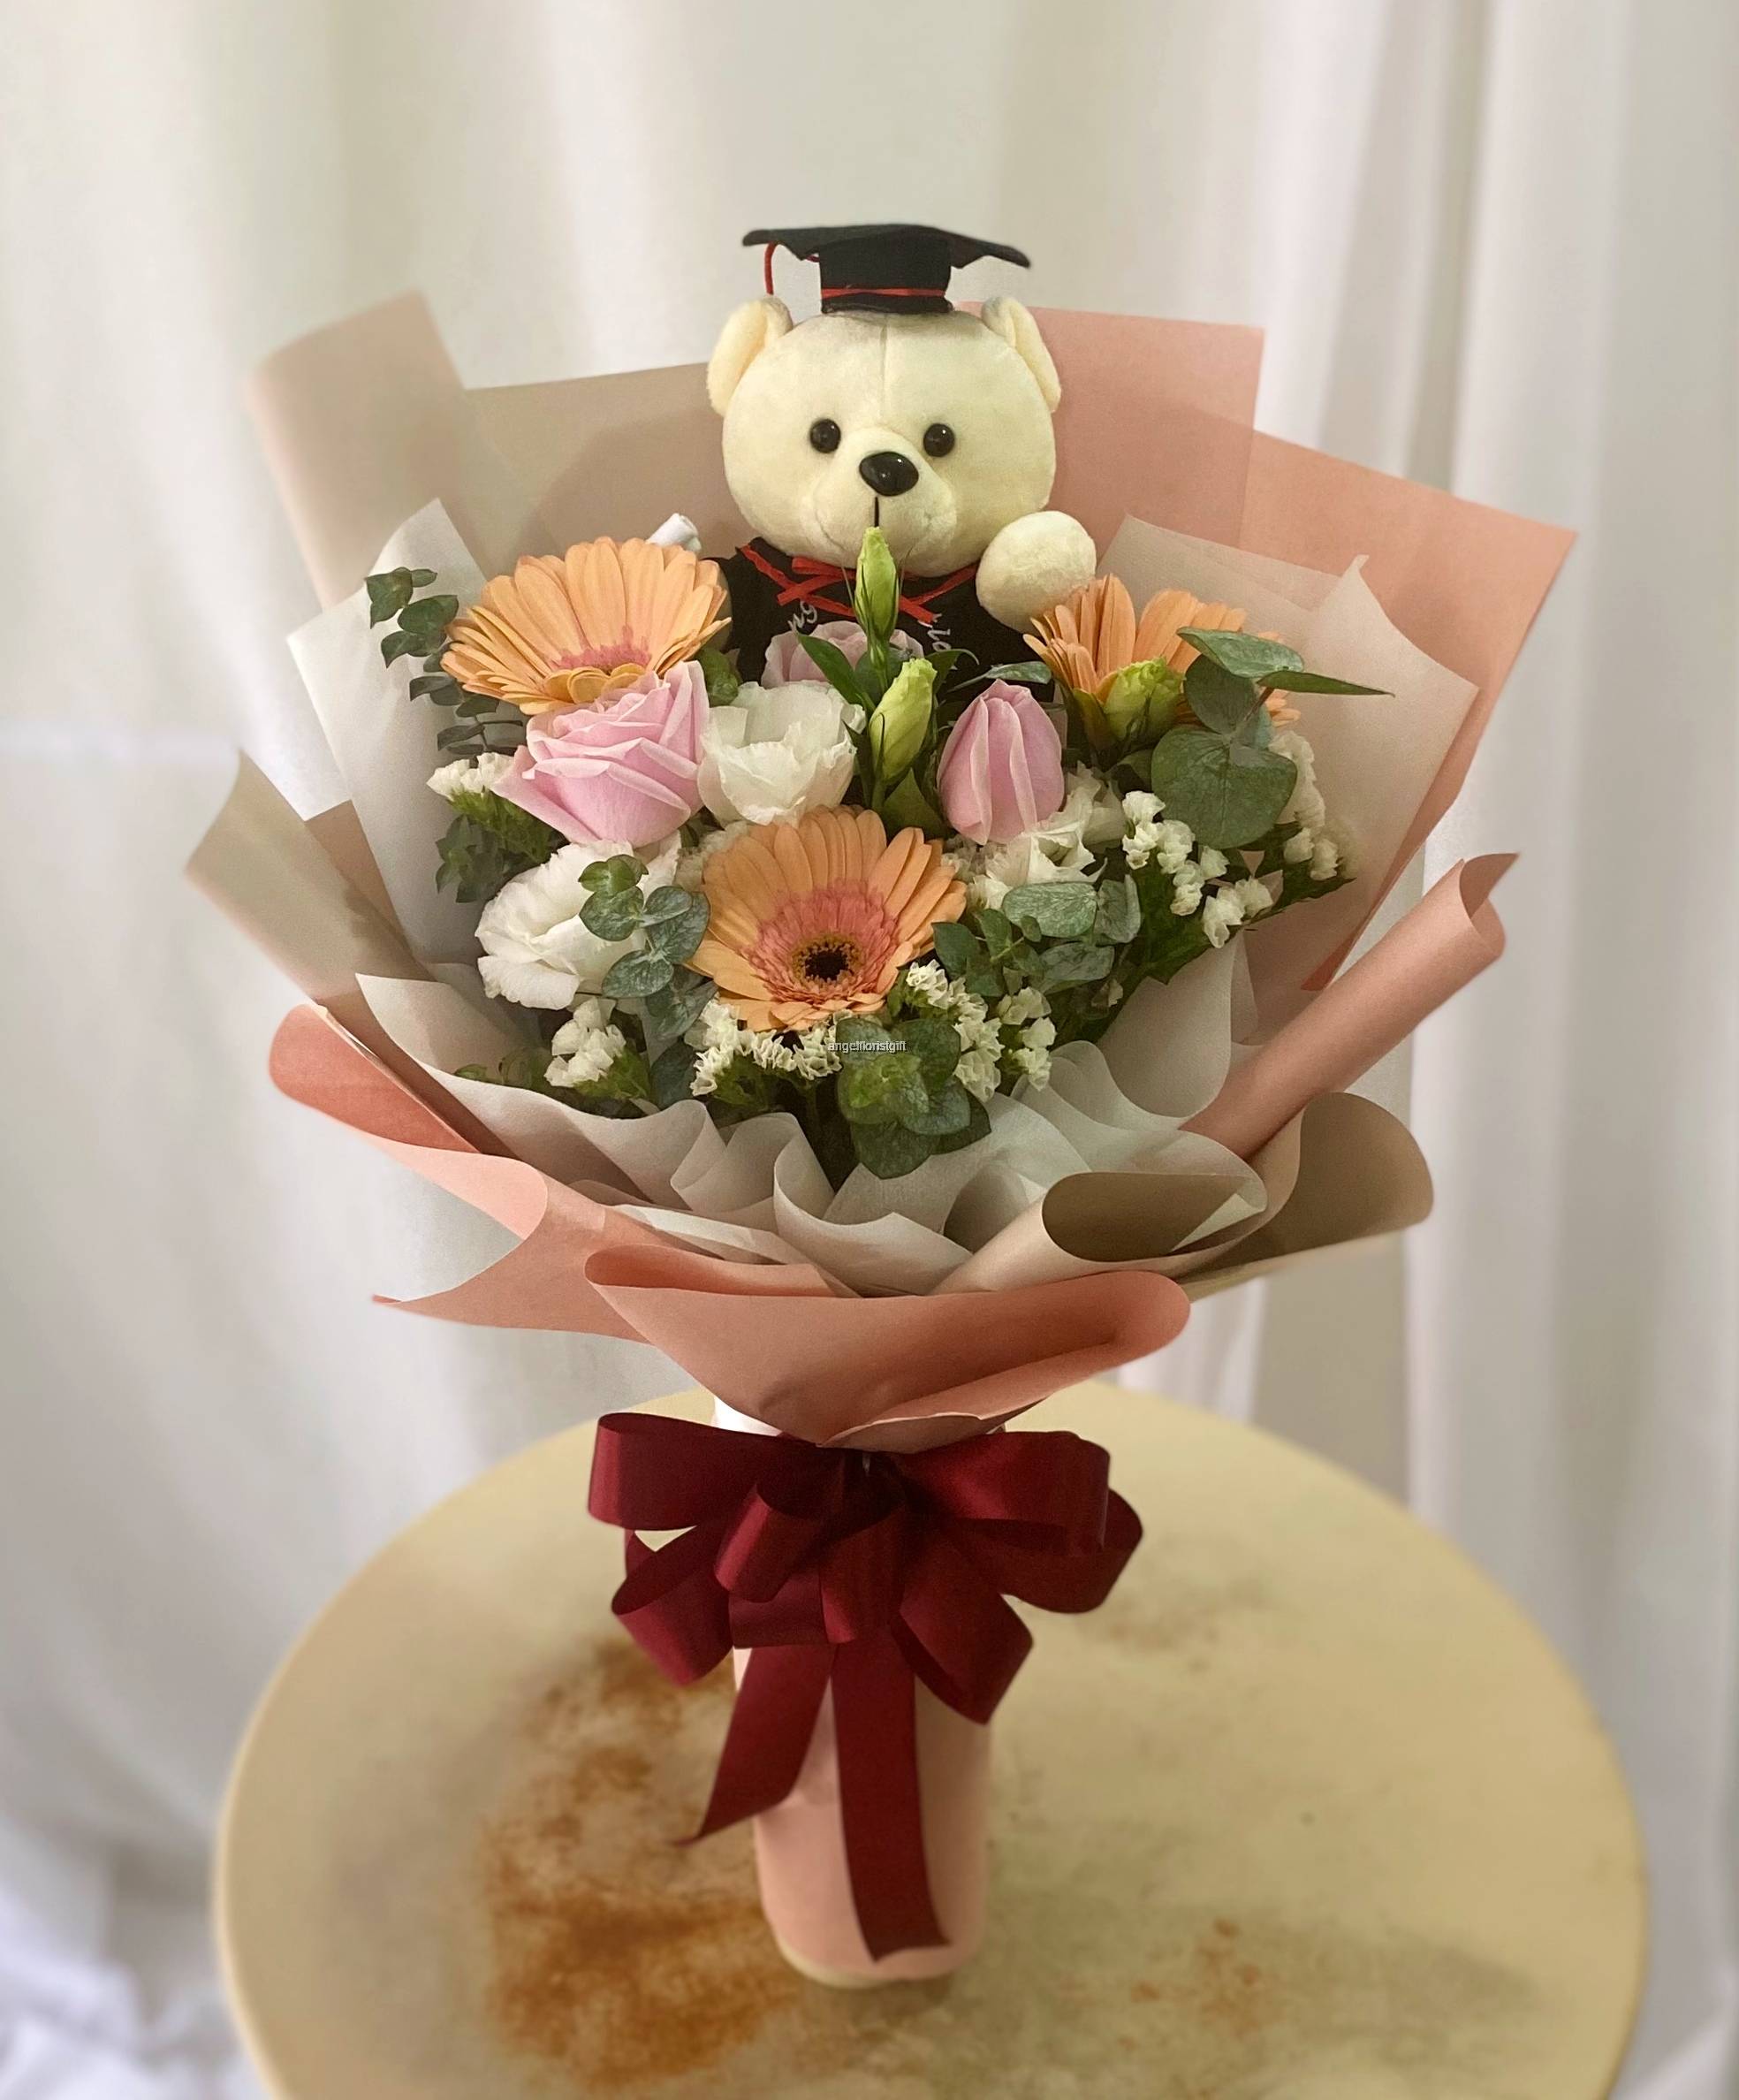 Celebrate Graduation with a Bouquet and Bear